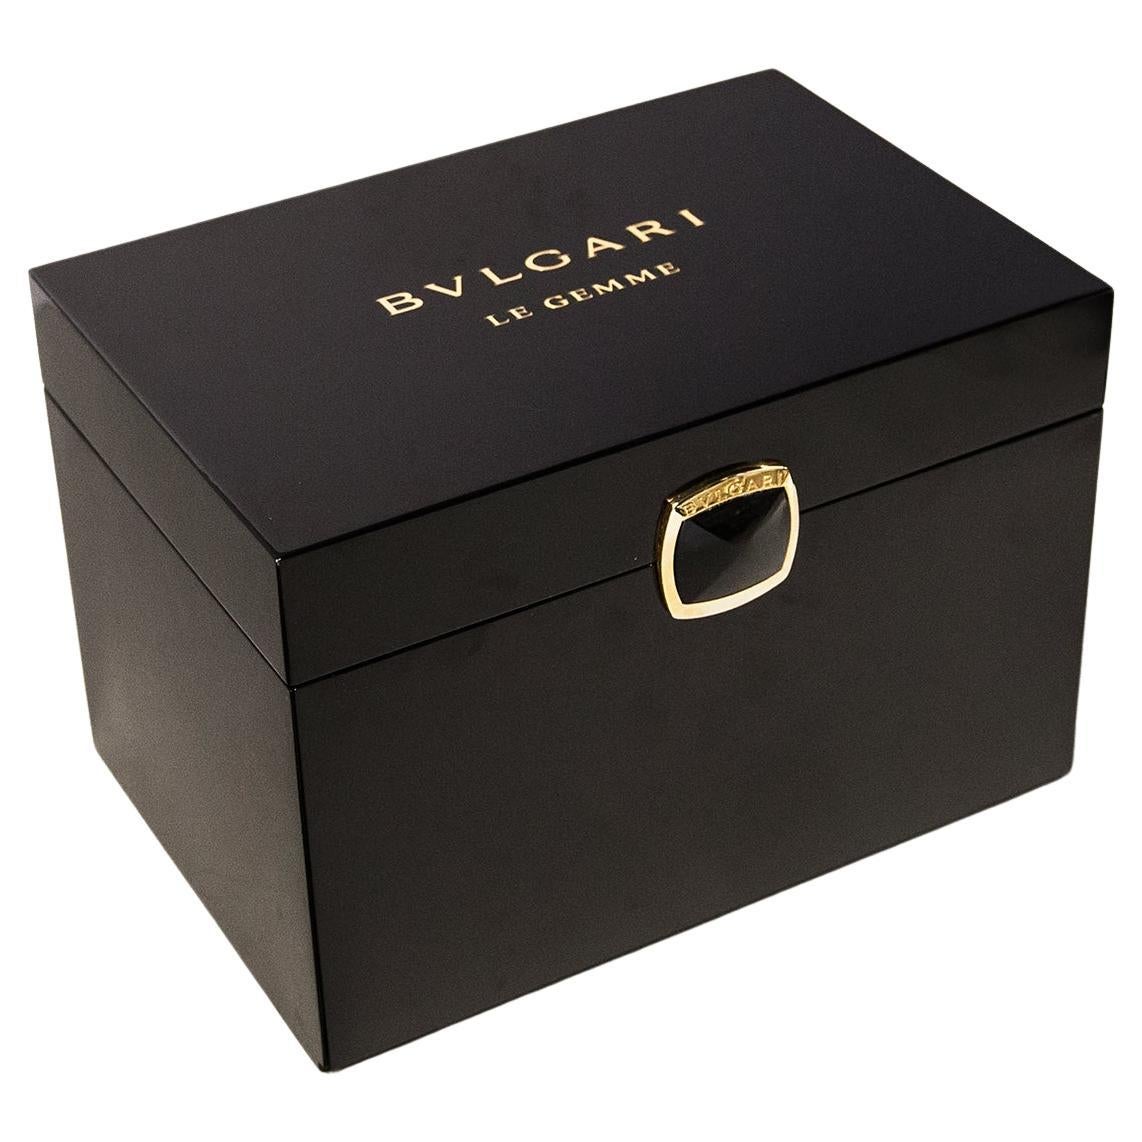 Huge Bvlgari China Lacquer Jewelry Le Gemme Box For Sale